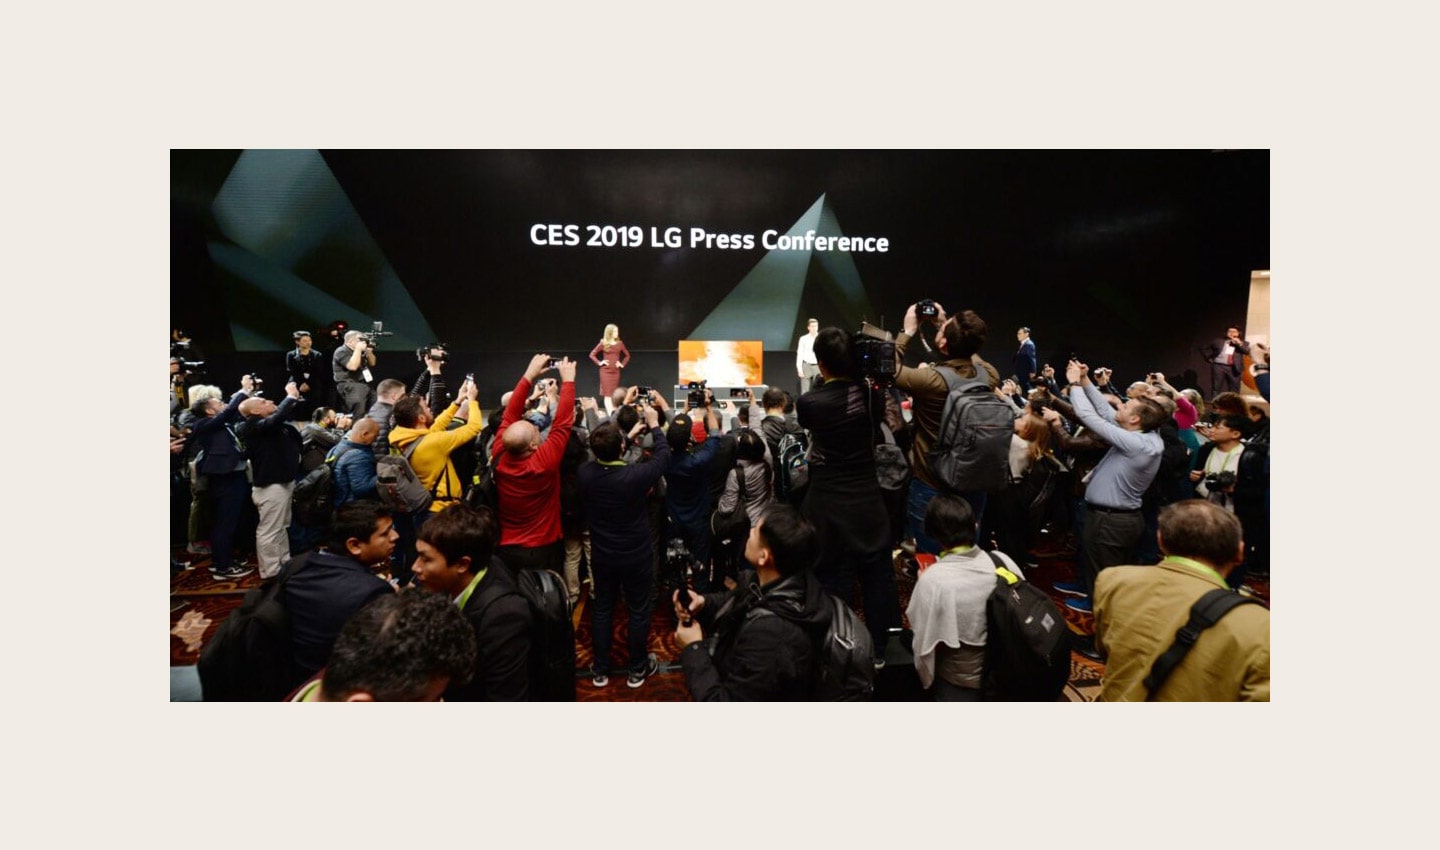 Far shot of the CES 2019 LG Press Conference with a pair of male and female models onstage posing while reporters are recording and taking pictures